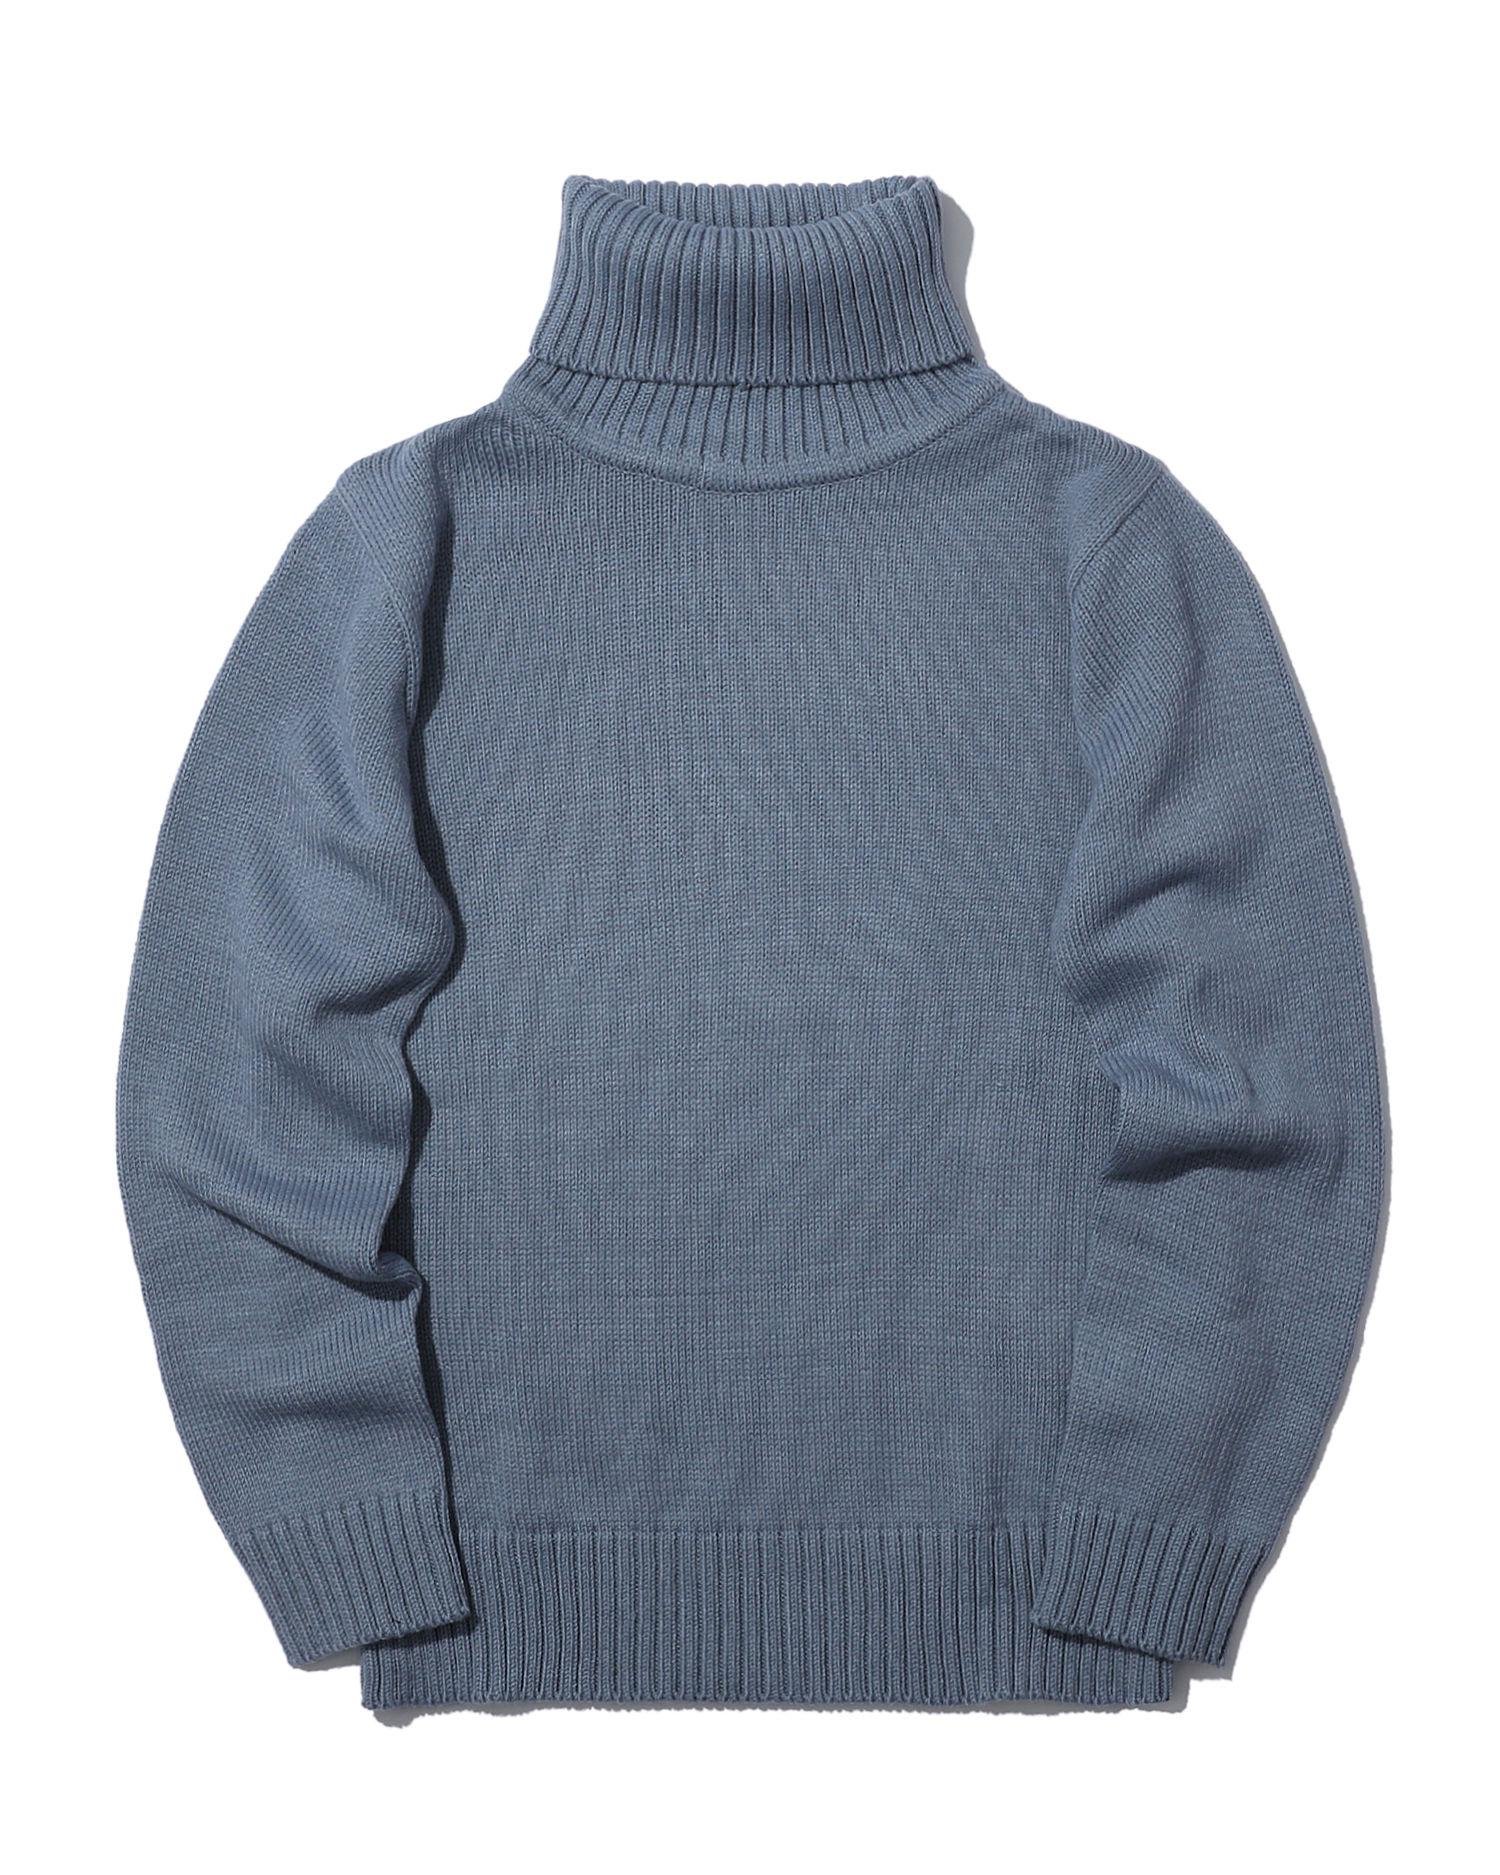 Turtle neck knit sweater by AMONG